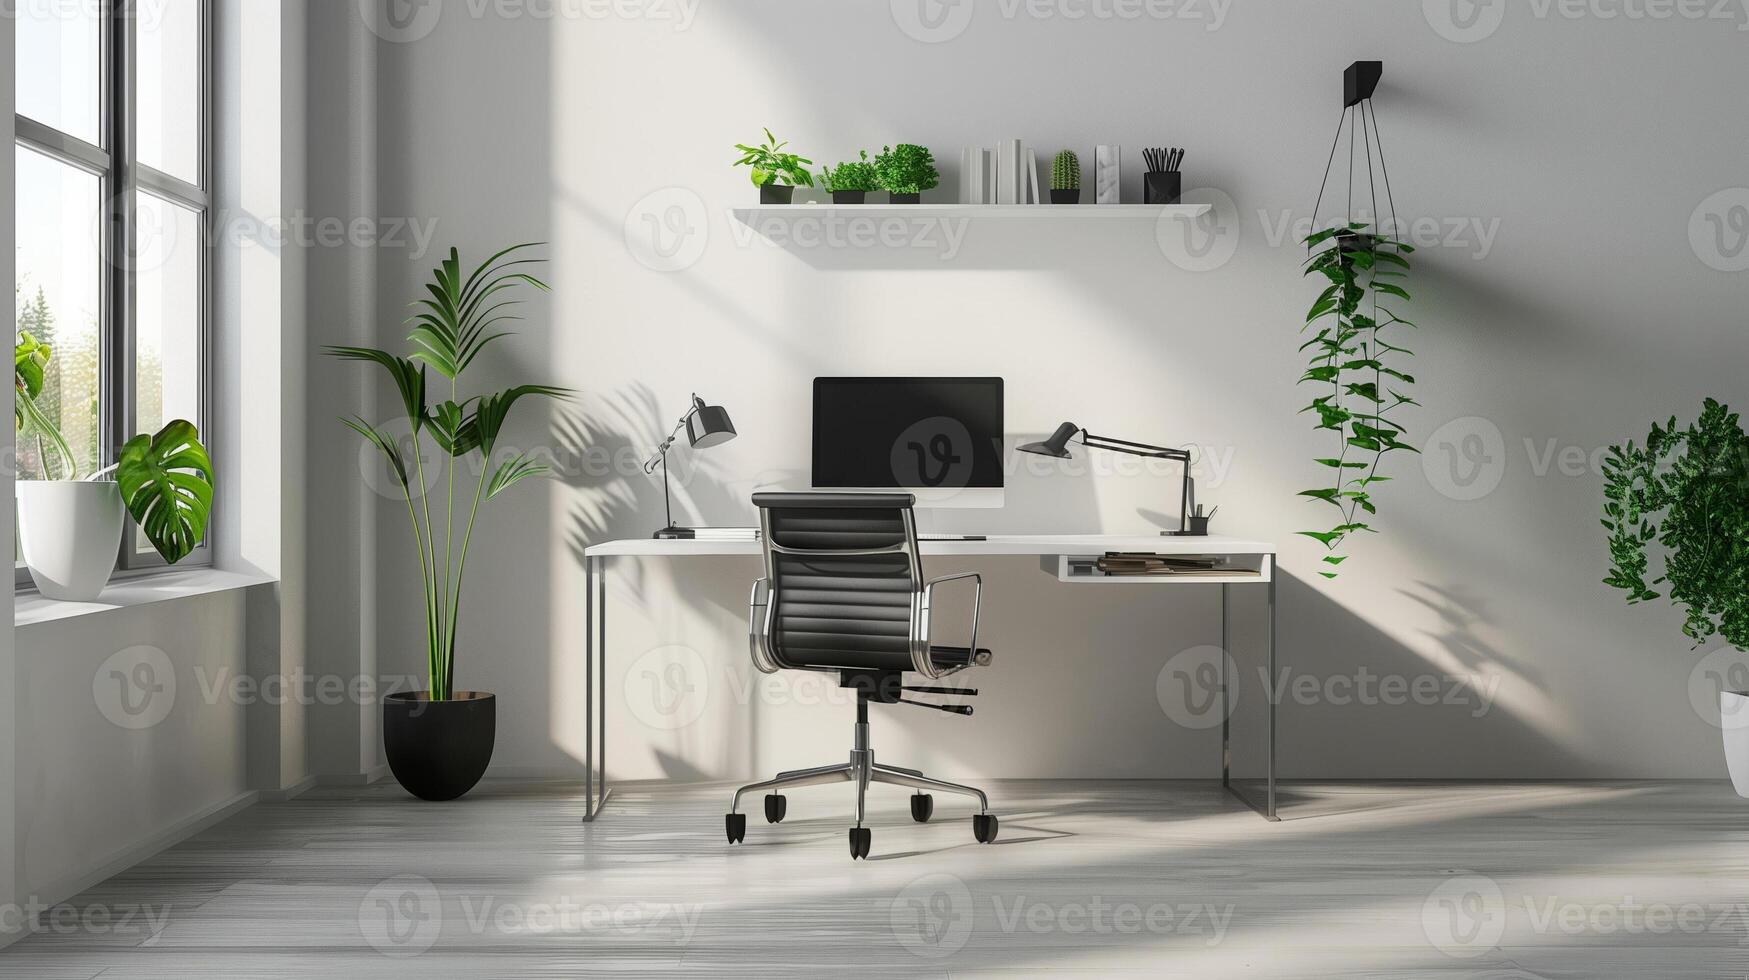 modern home office setup minimalistic design with green plants white desk and a black ergonomic chair photo